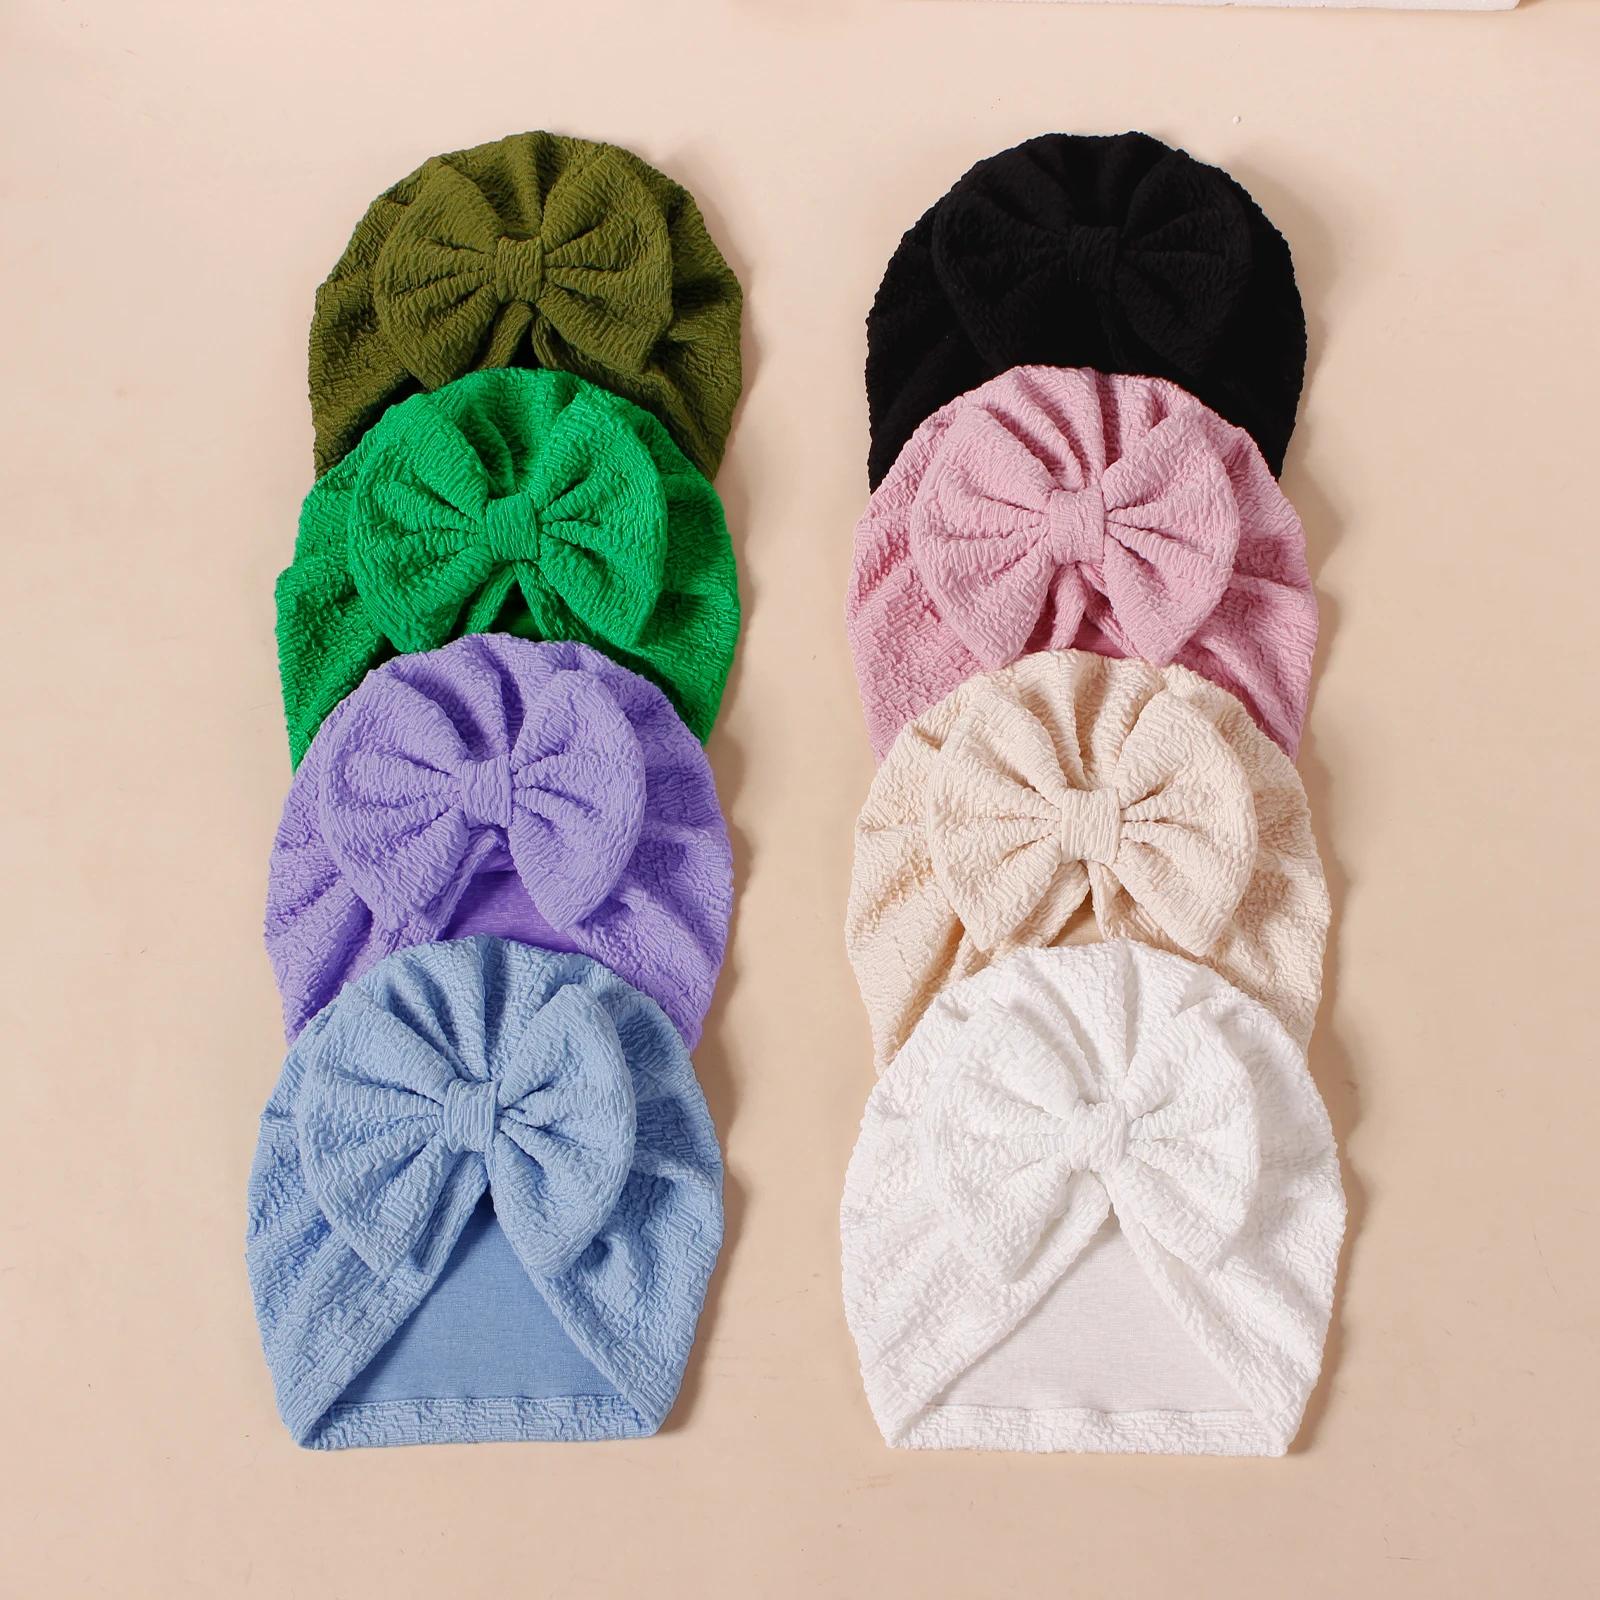 New Soft Cotton Bowknot Turban Babes Solid Color HeadWraps Solid Baby India Hat Kid Girl Infant Beanie Cap Toddler Baby Headwear new soft cotton round knot turban babes donuts headwraps solid baby india hat kids girls infant beanie cap toddler baby headwear